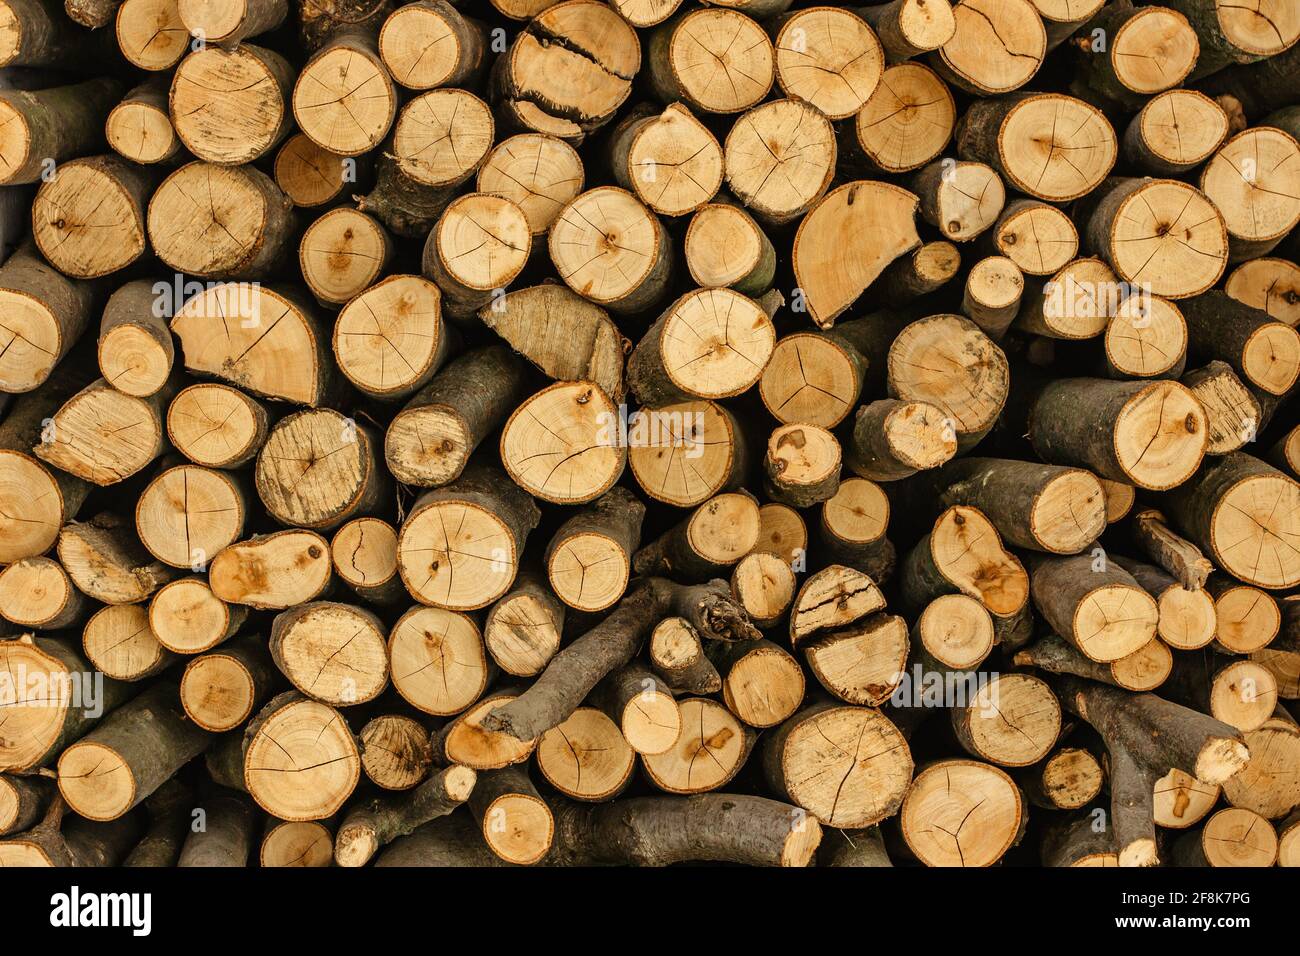 Wood texture detail. Stack of firewood. Pile of wood logs stored for winter. Wall of woods. Wooden natural background. Storage of dry chopped firewood Stock Photo